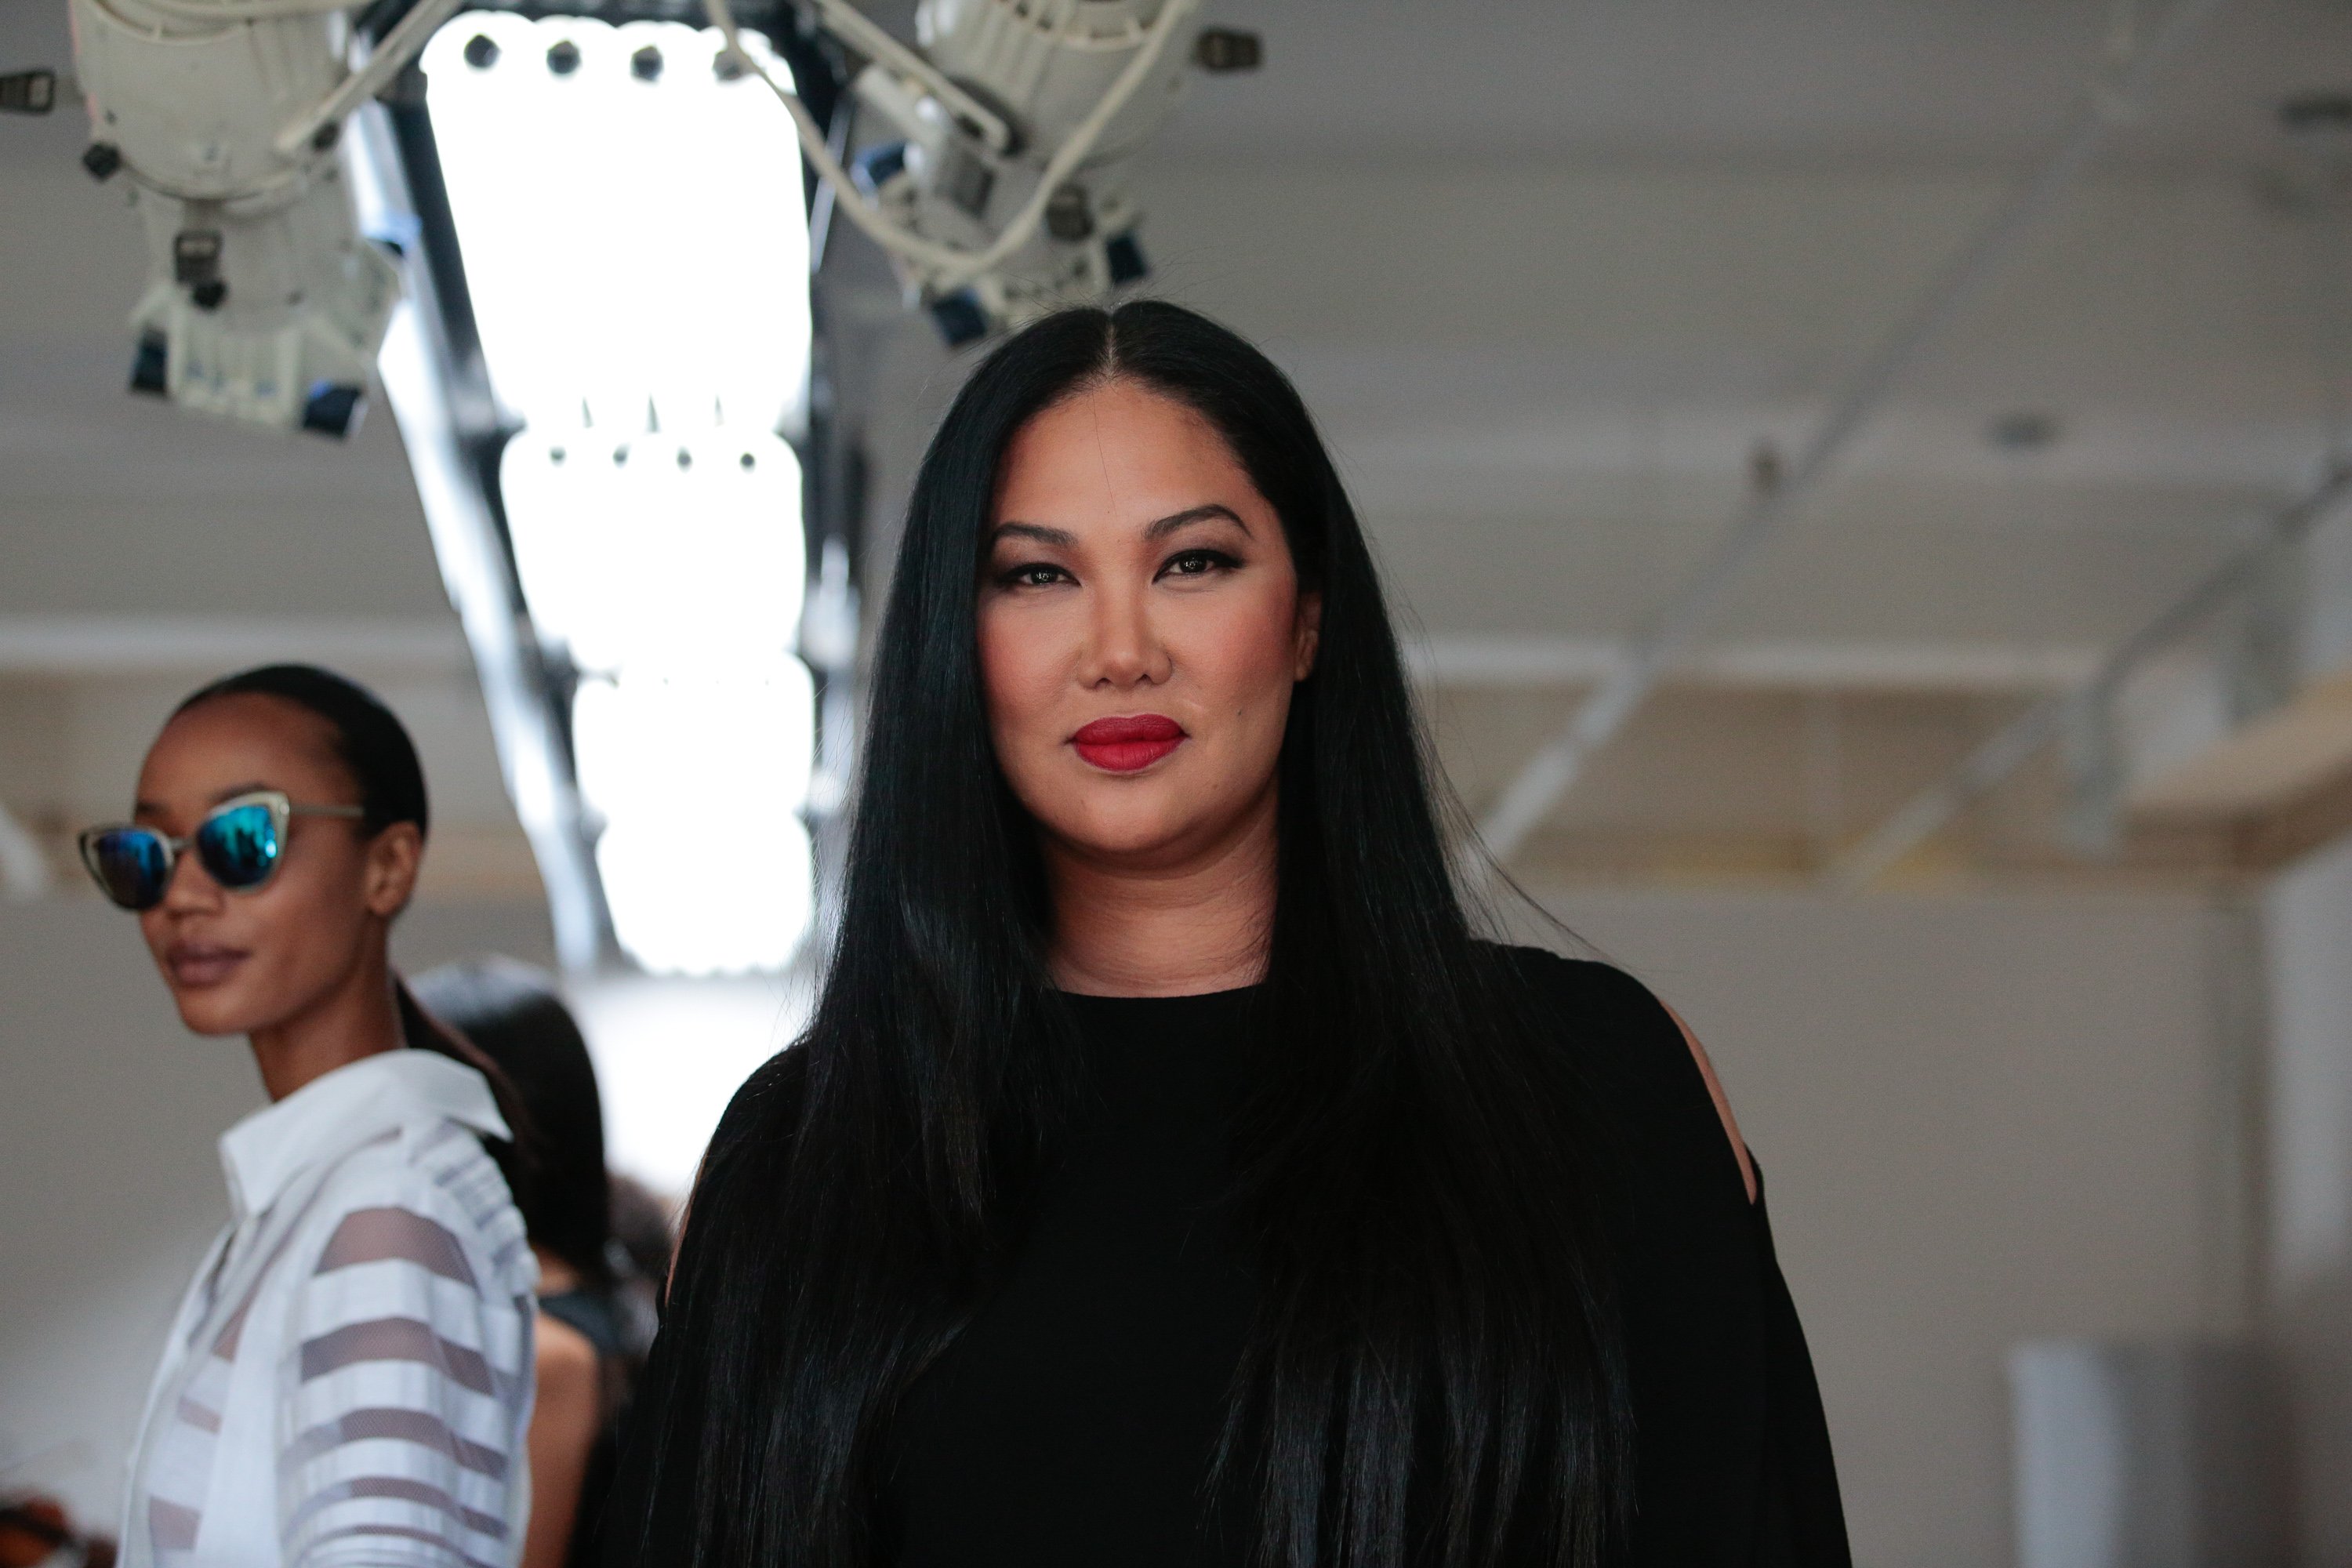 Kimora Lee Simmon during New York Fashion Week at The Gallery, Skylight at Clarkson Sq on September 14, 2016, in New York City. | Source: Getty Images.